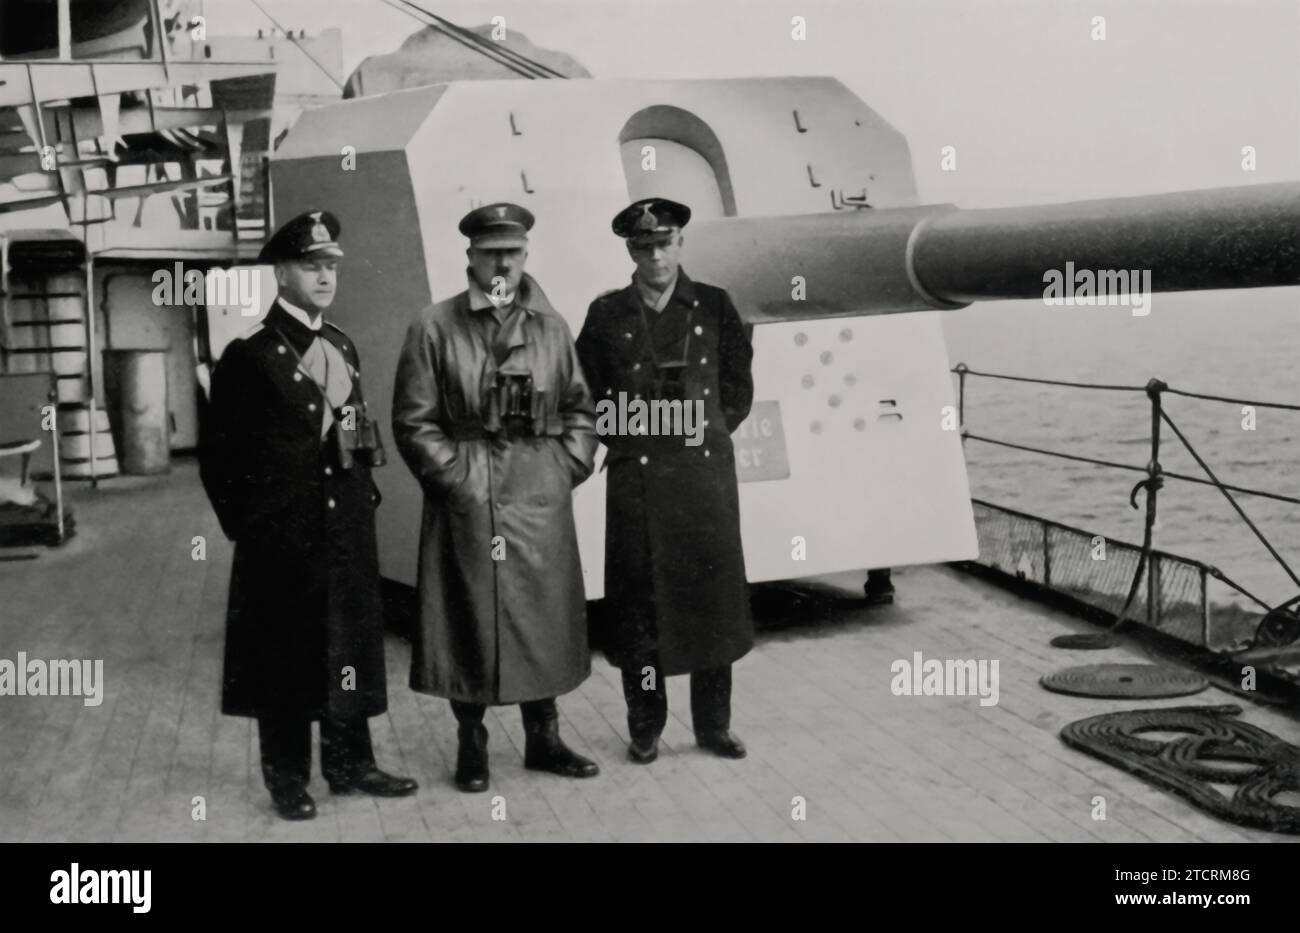 Adolf Hitler, standing on the deck of a warship in front of an artillery gun, during 'Besuch bei der Flotte' (Visit to the Fleet). This moment captures his engagement with the Kriegsmarine, the German Navy, highlighting his role in promoting the military's expansion and modernization, crucial elements of the Nazi regime's agenda. Stock Photo